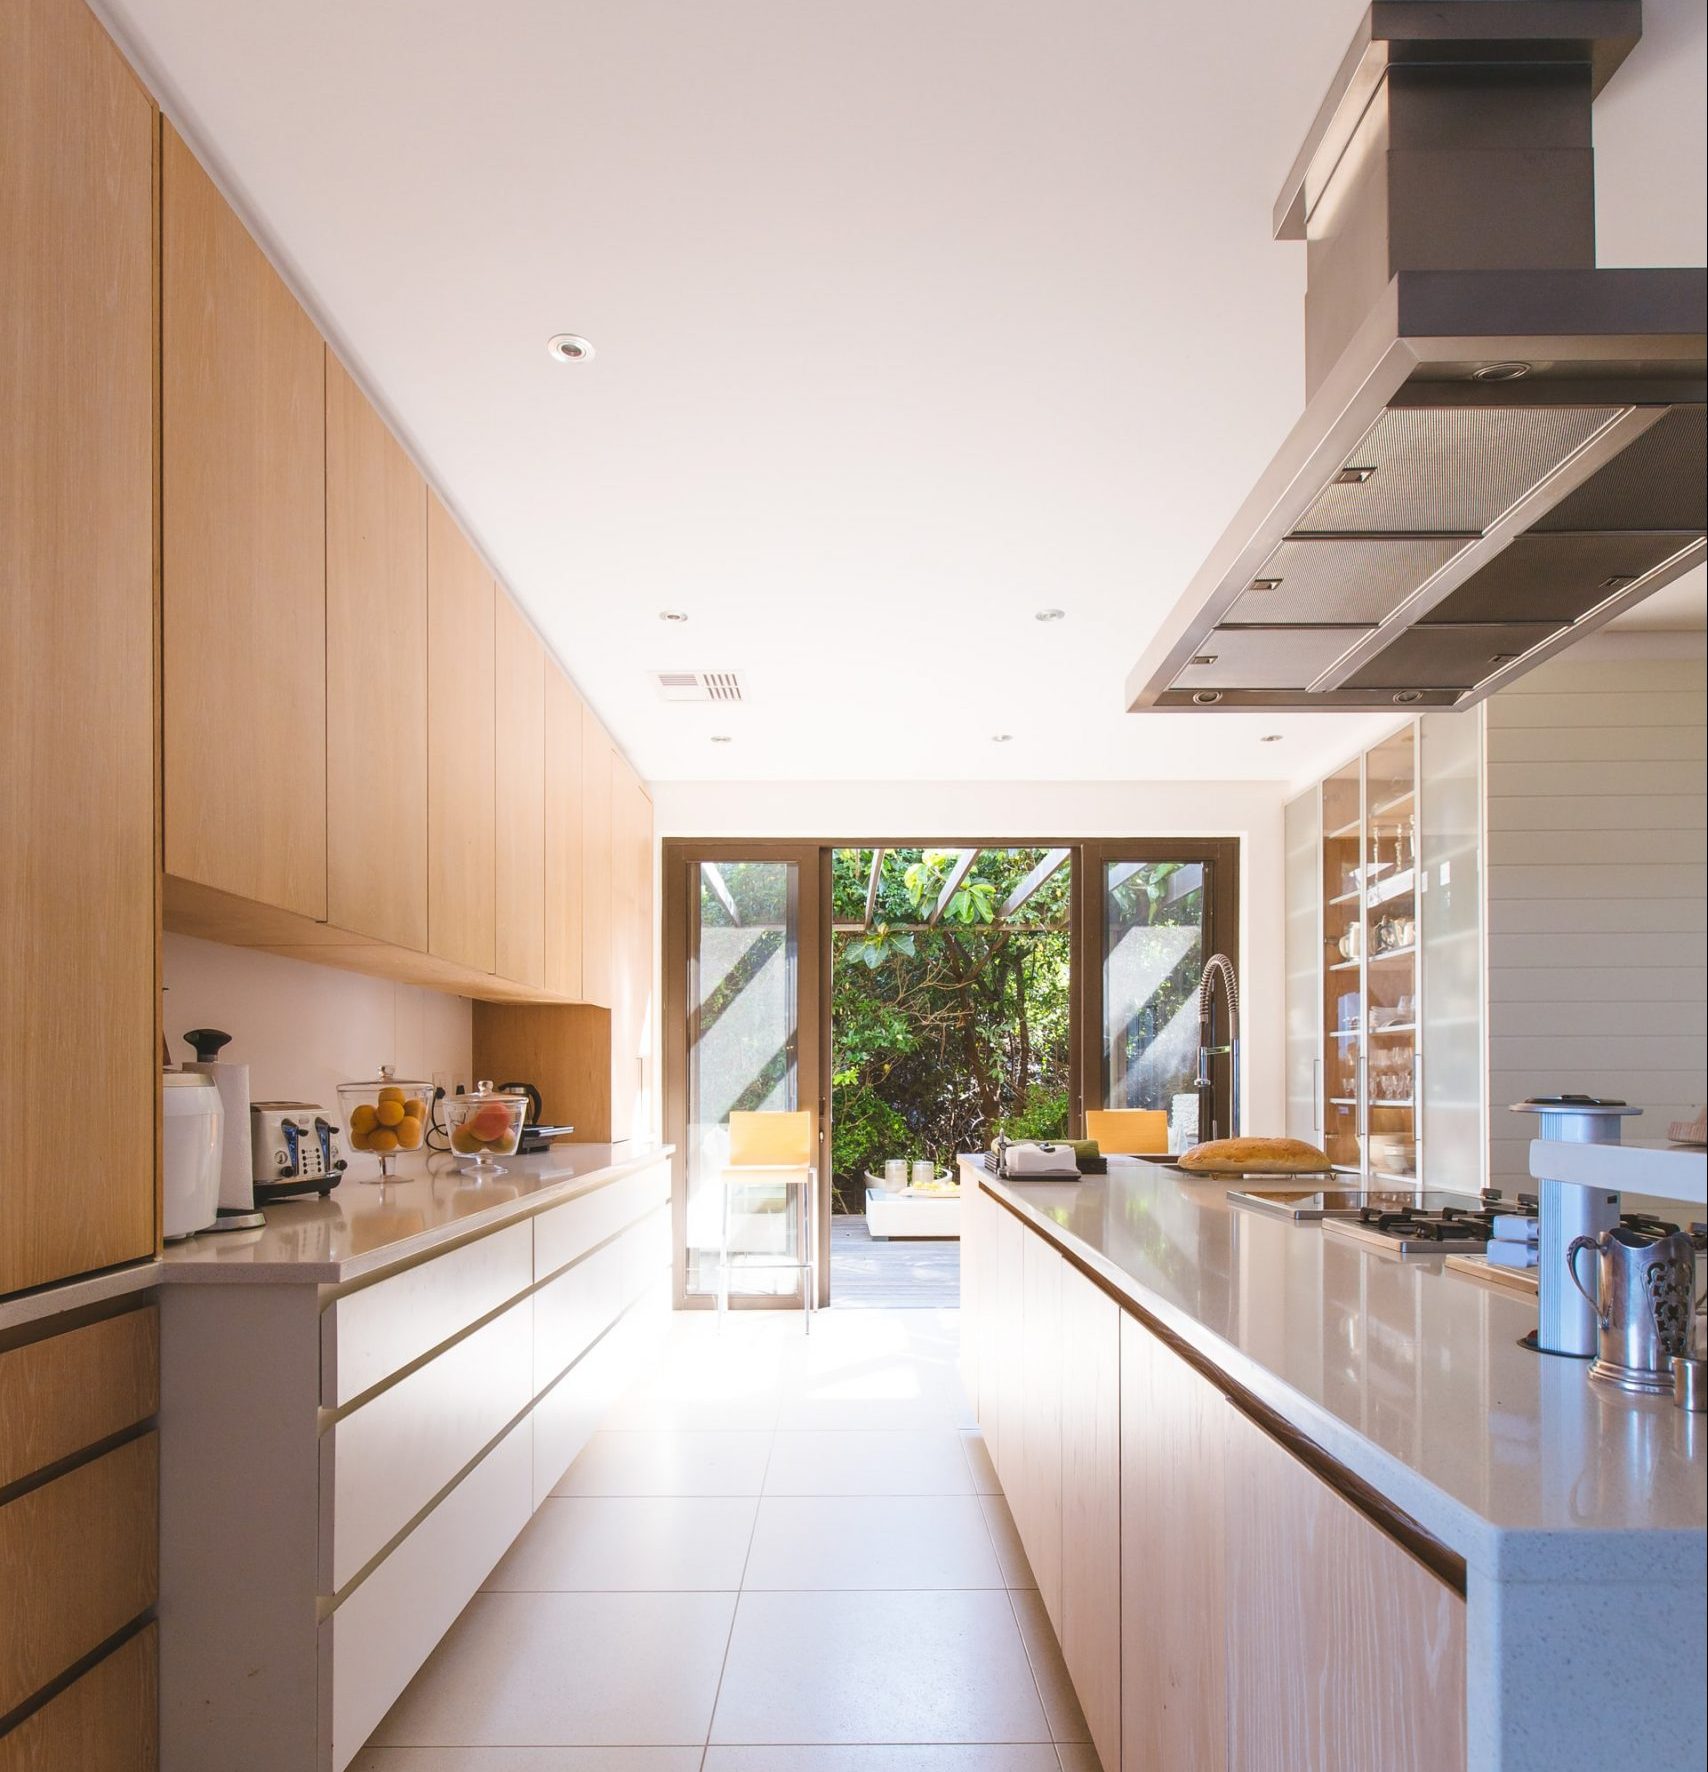 Acrylic kitchen fronts – advantages and disadvantages